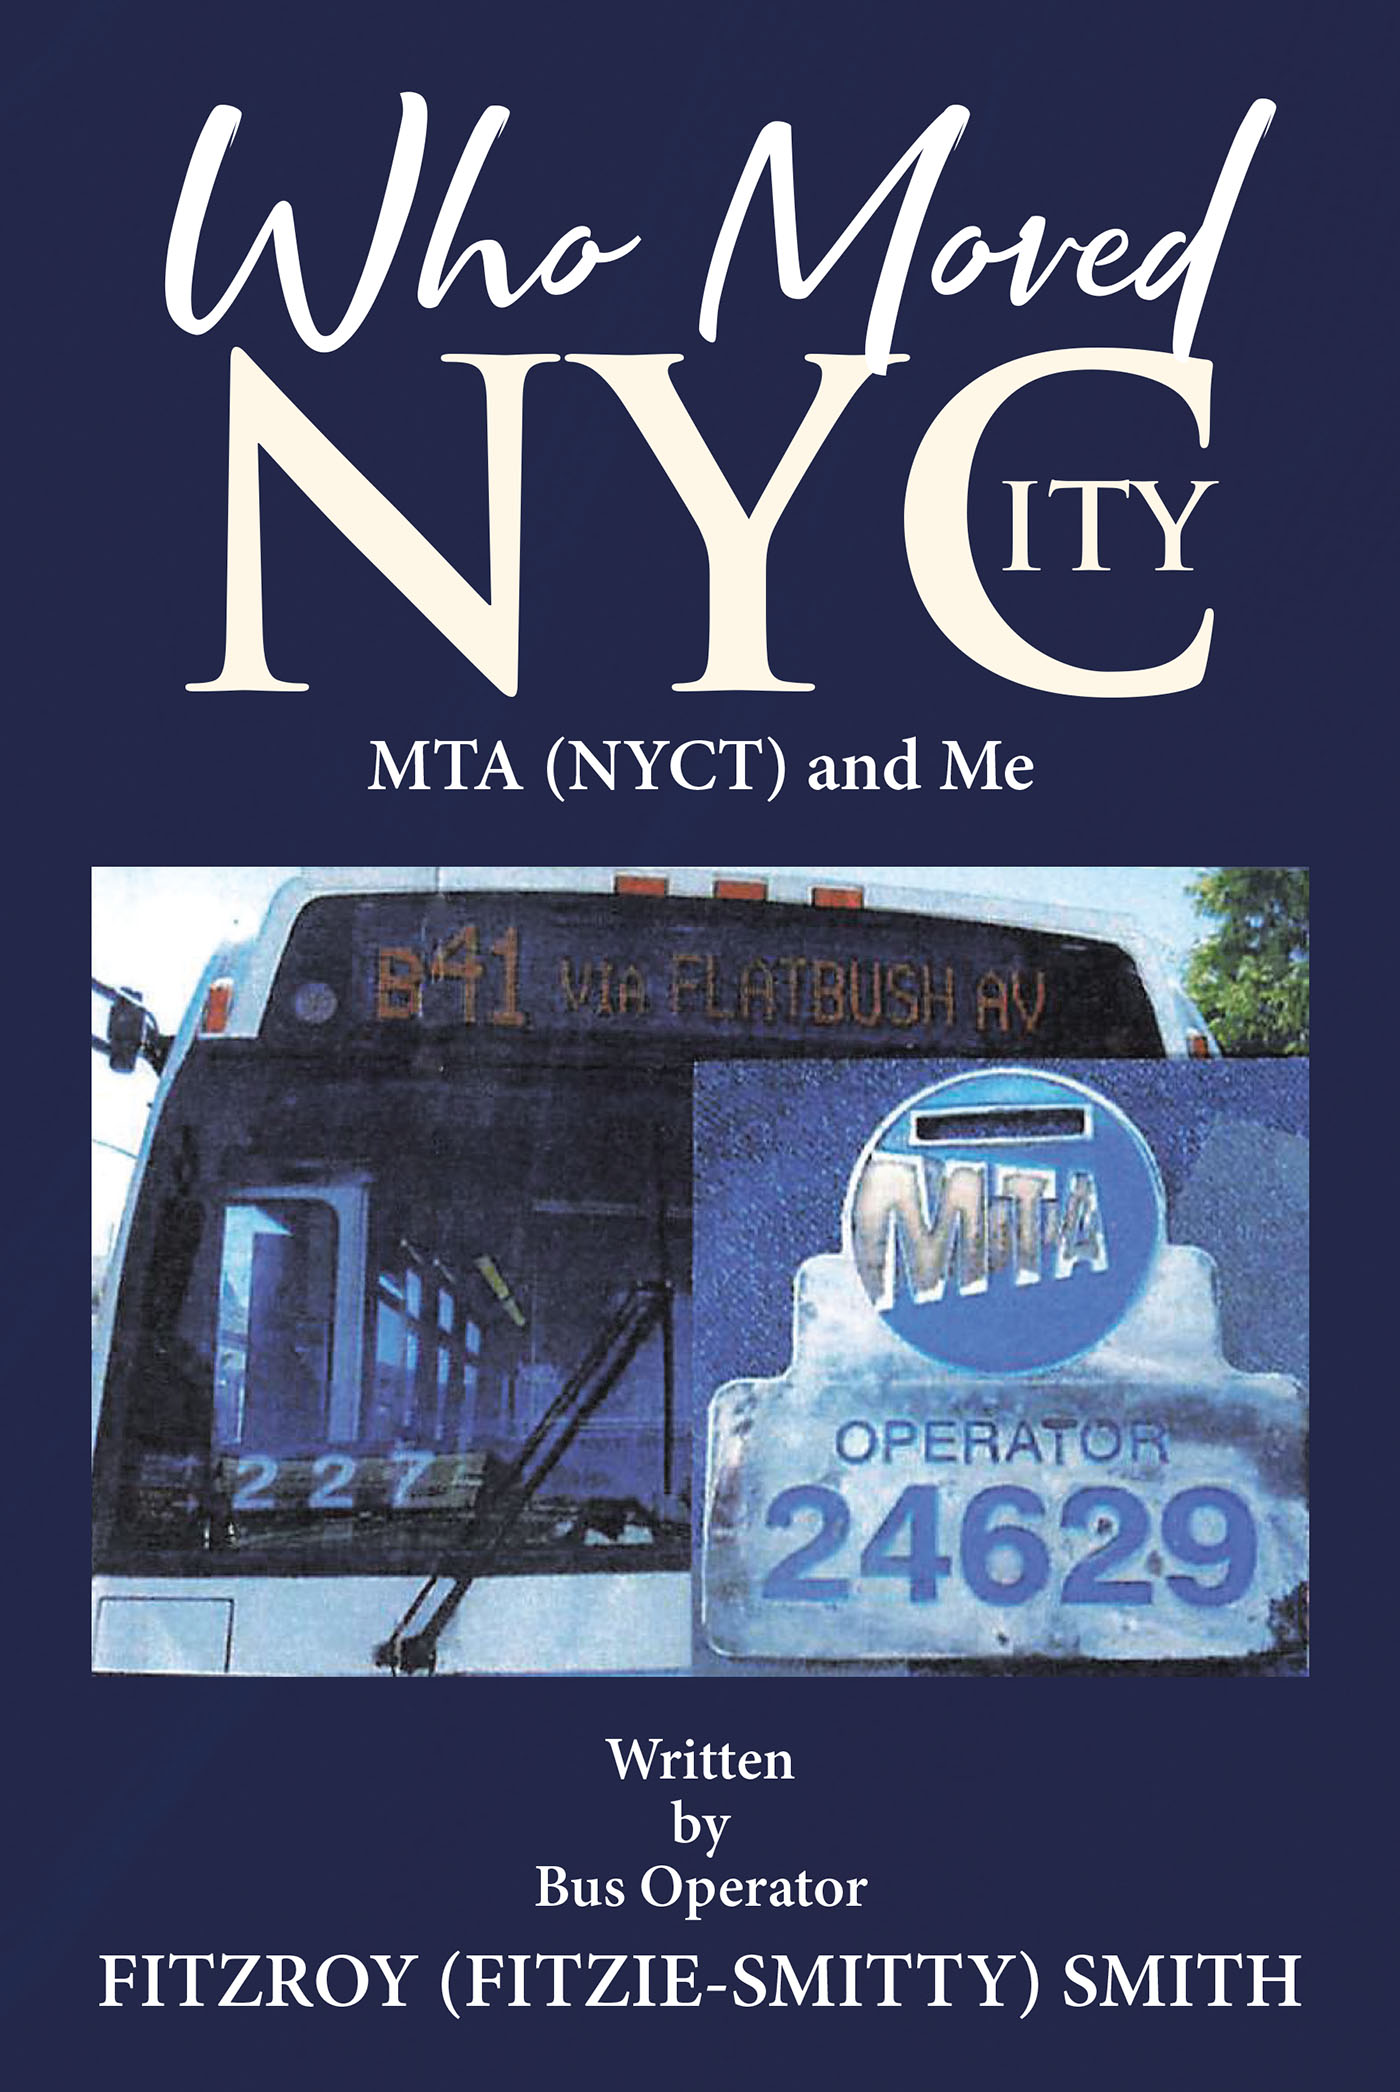 Fitzroy (Fitzie-Smitty) Smith’s new book, “Who Moved NYCity: MTA (NYCT) and Me,” is a Fresh and Intriguing Nonfiction Tale About the Author’s Career in New York City